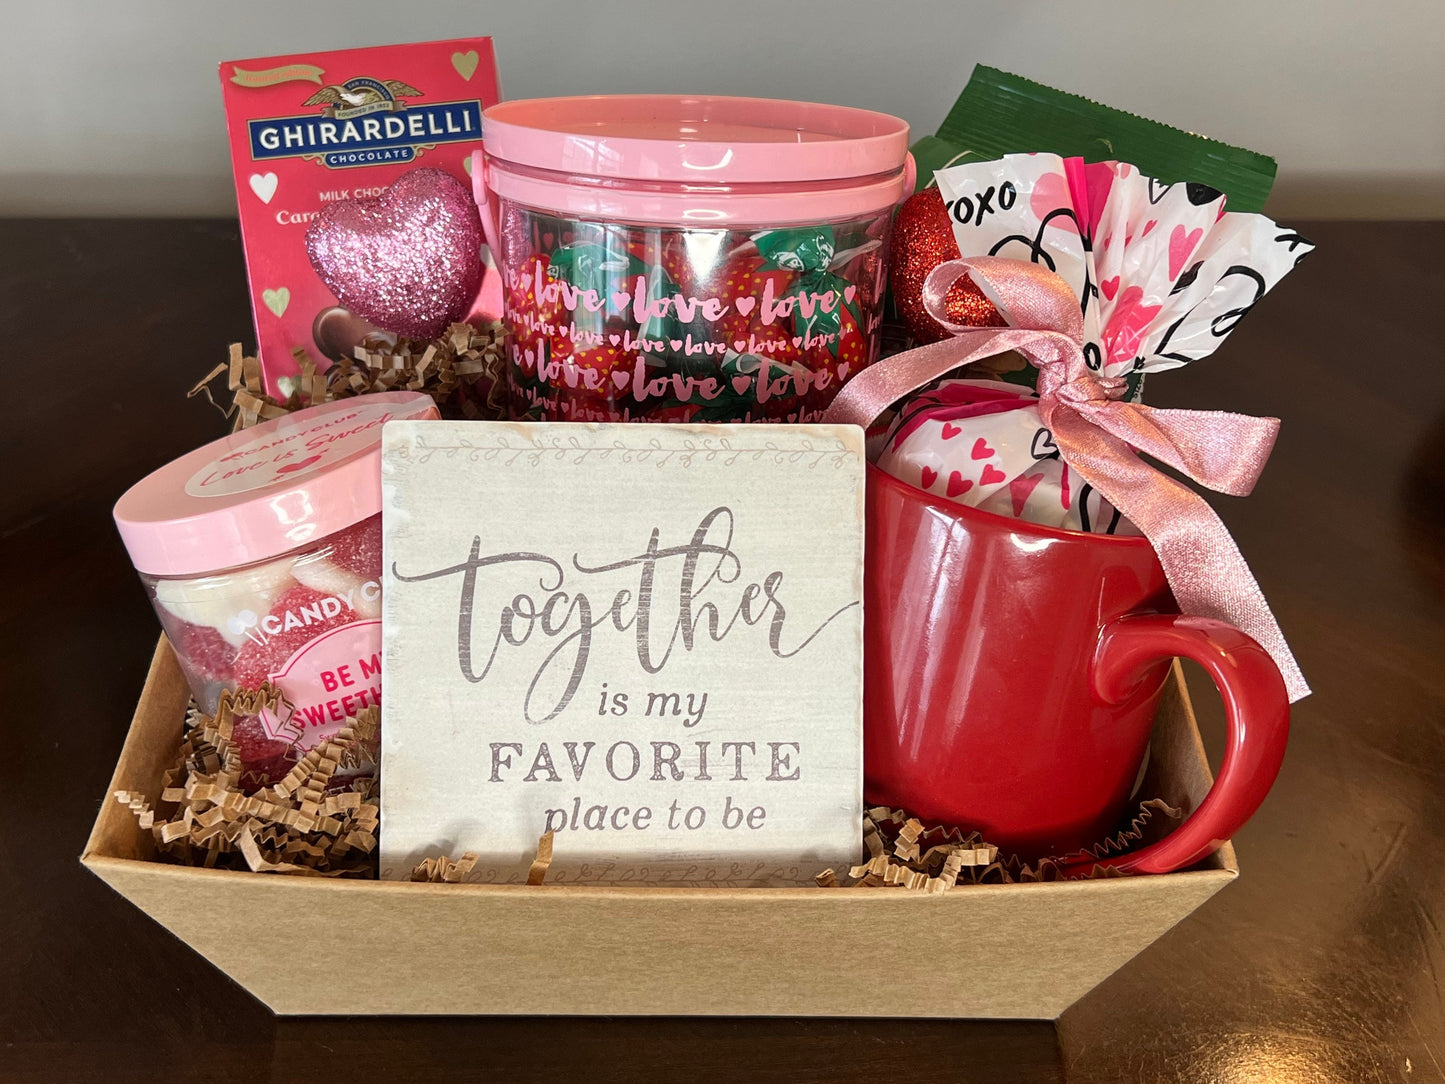 Some Last Minute Valentine's Day Basket Ideas! - The Blush Home Blog